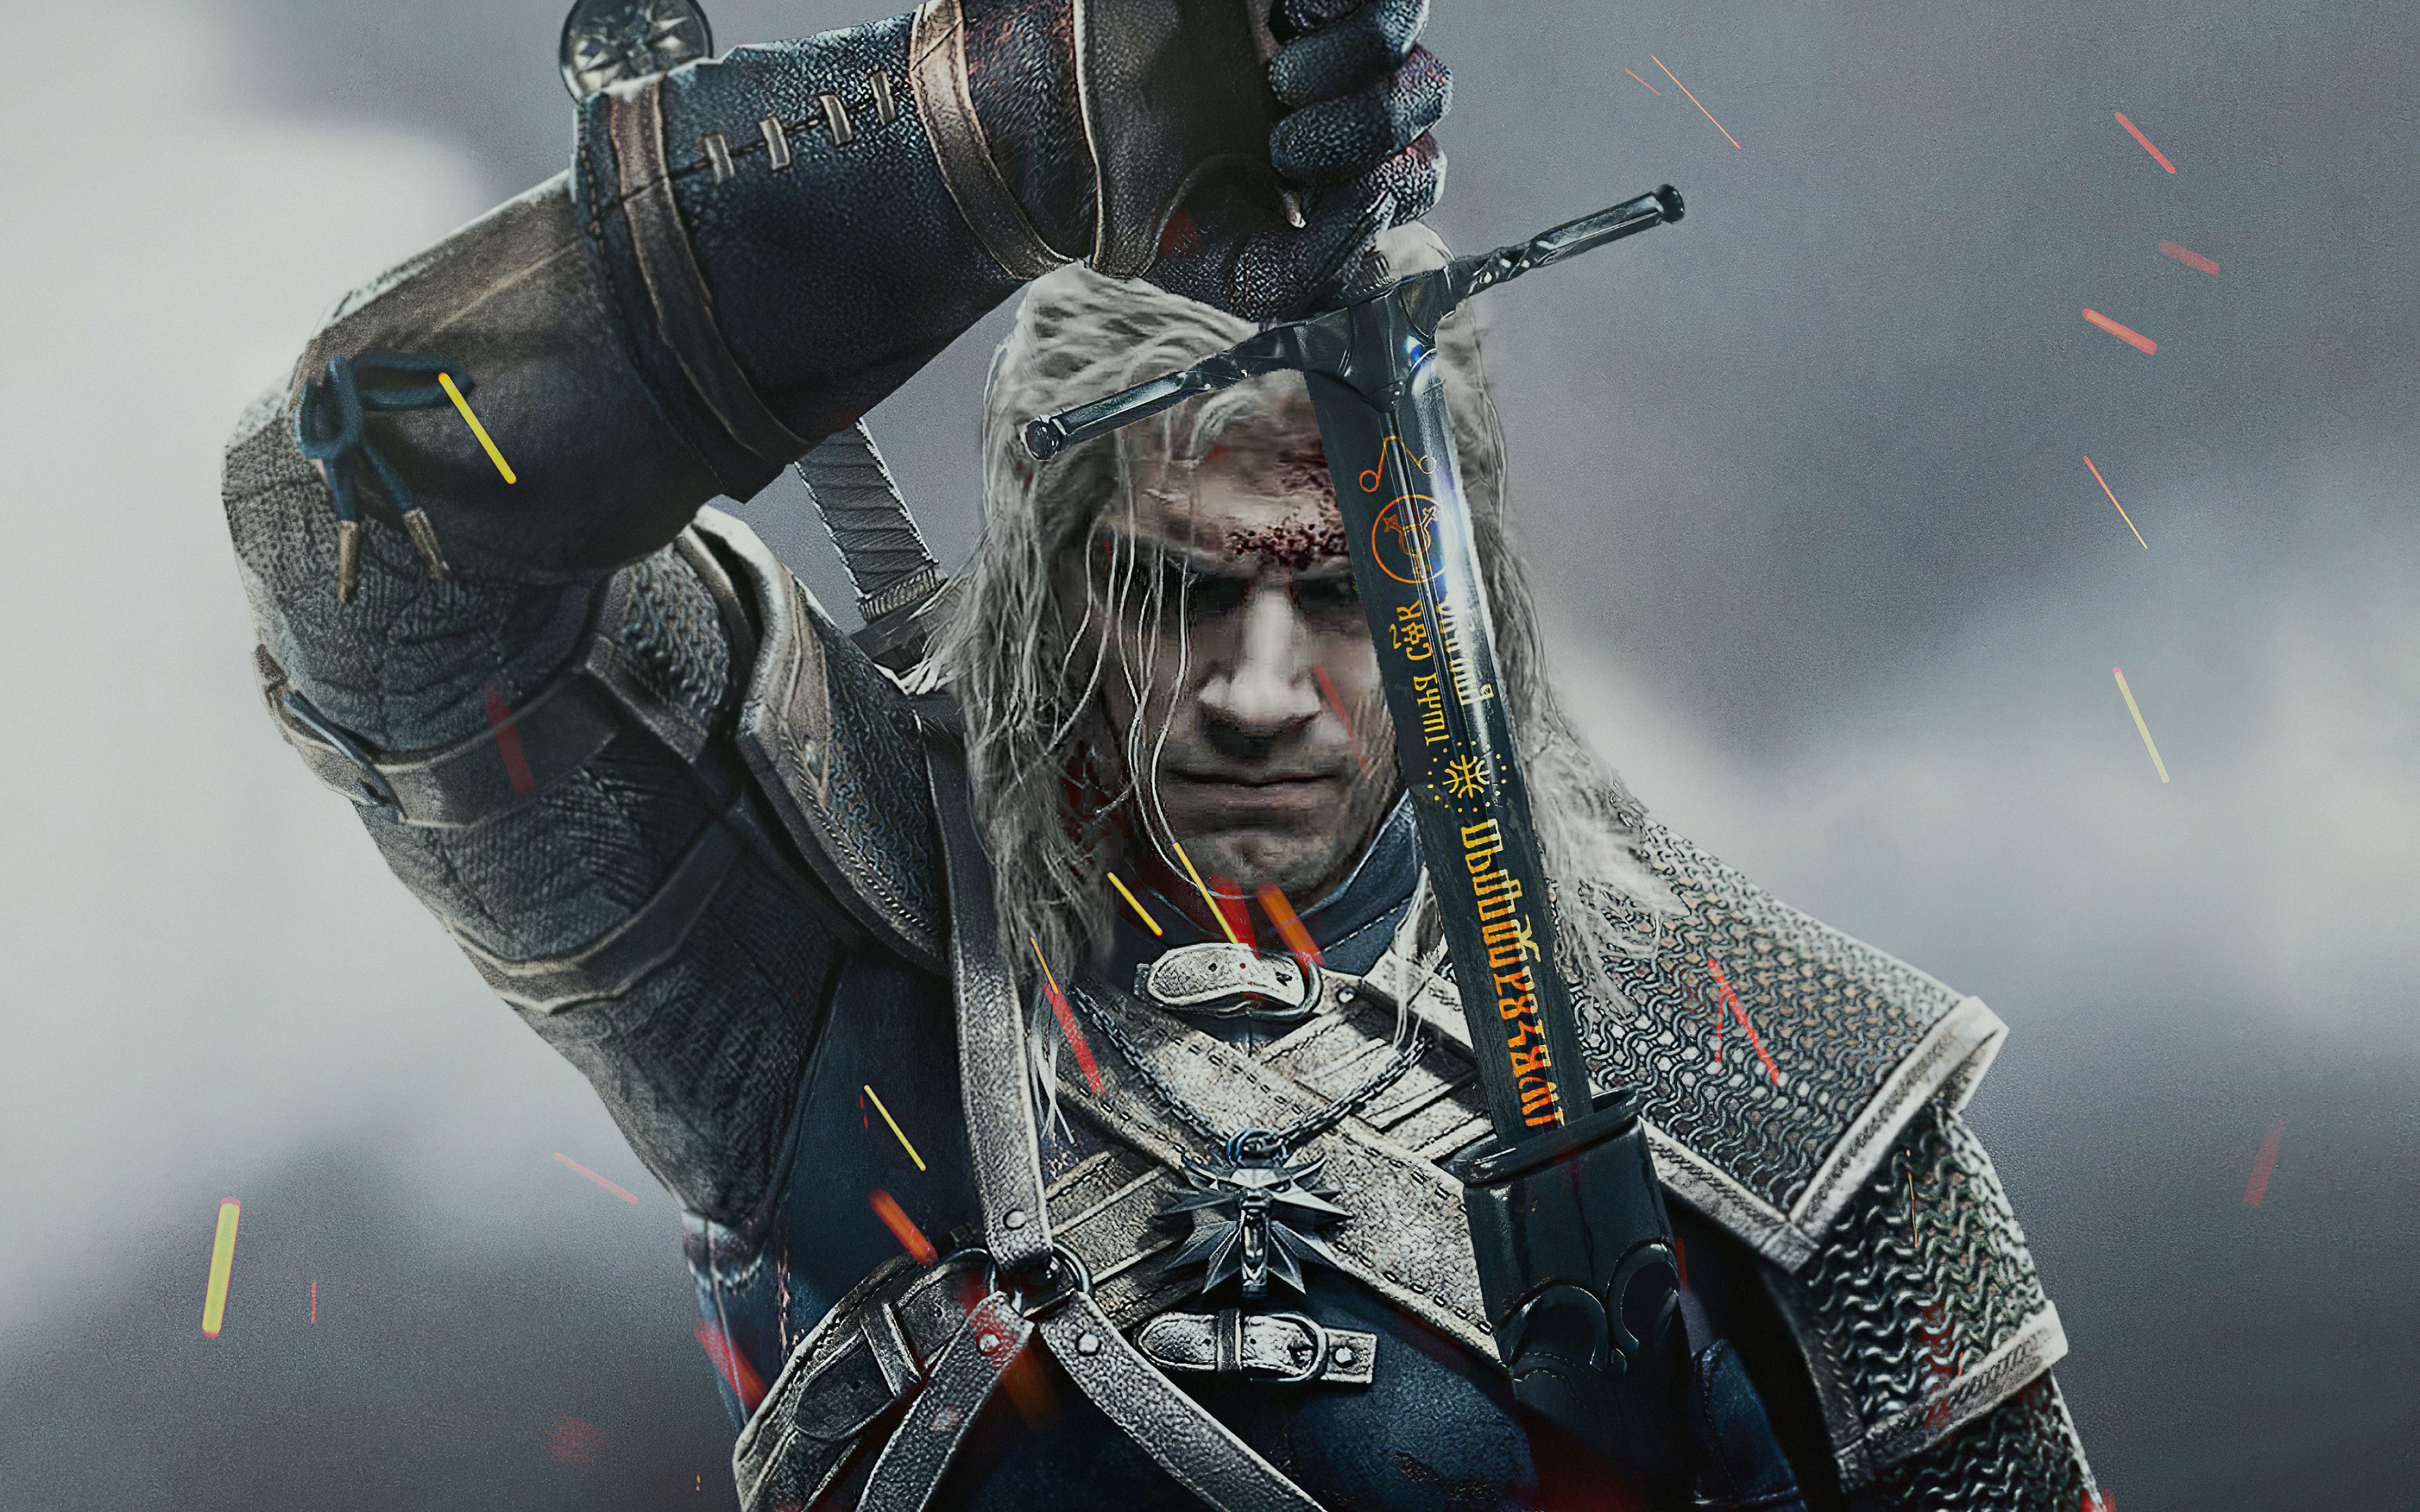 Henry Cavill in The Witcher Wallpaper 4k Ultra HD